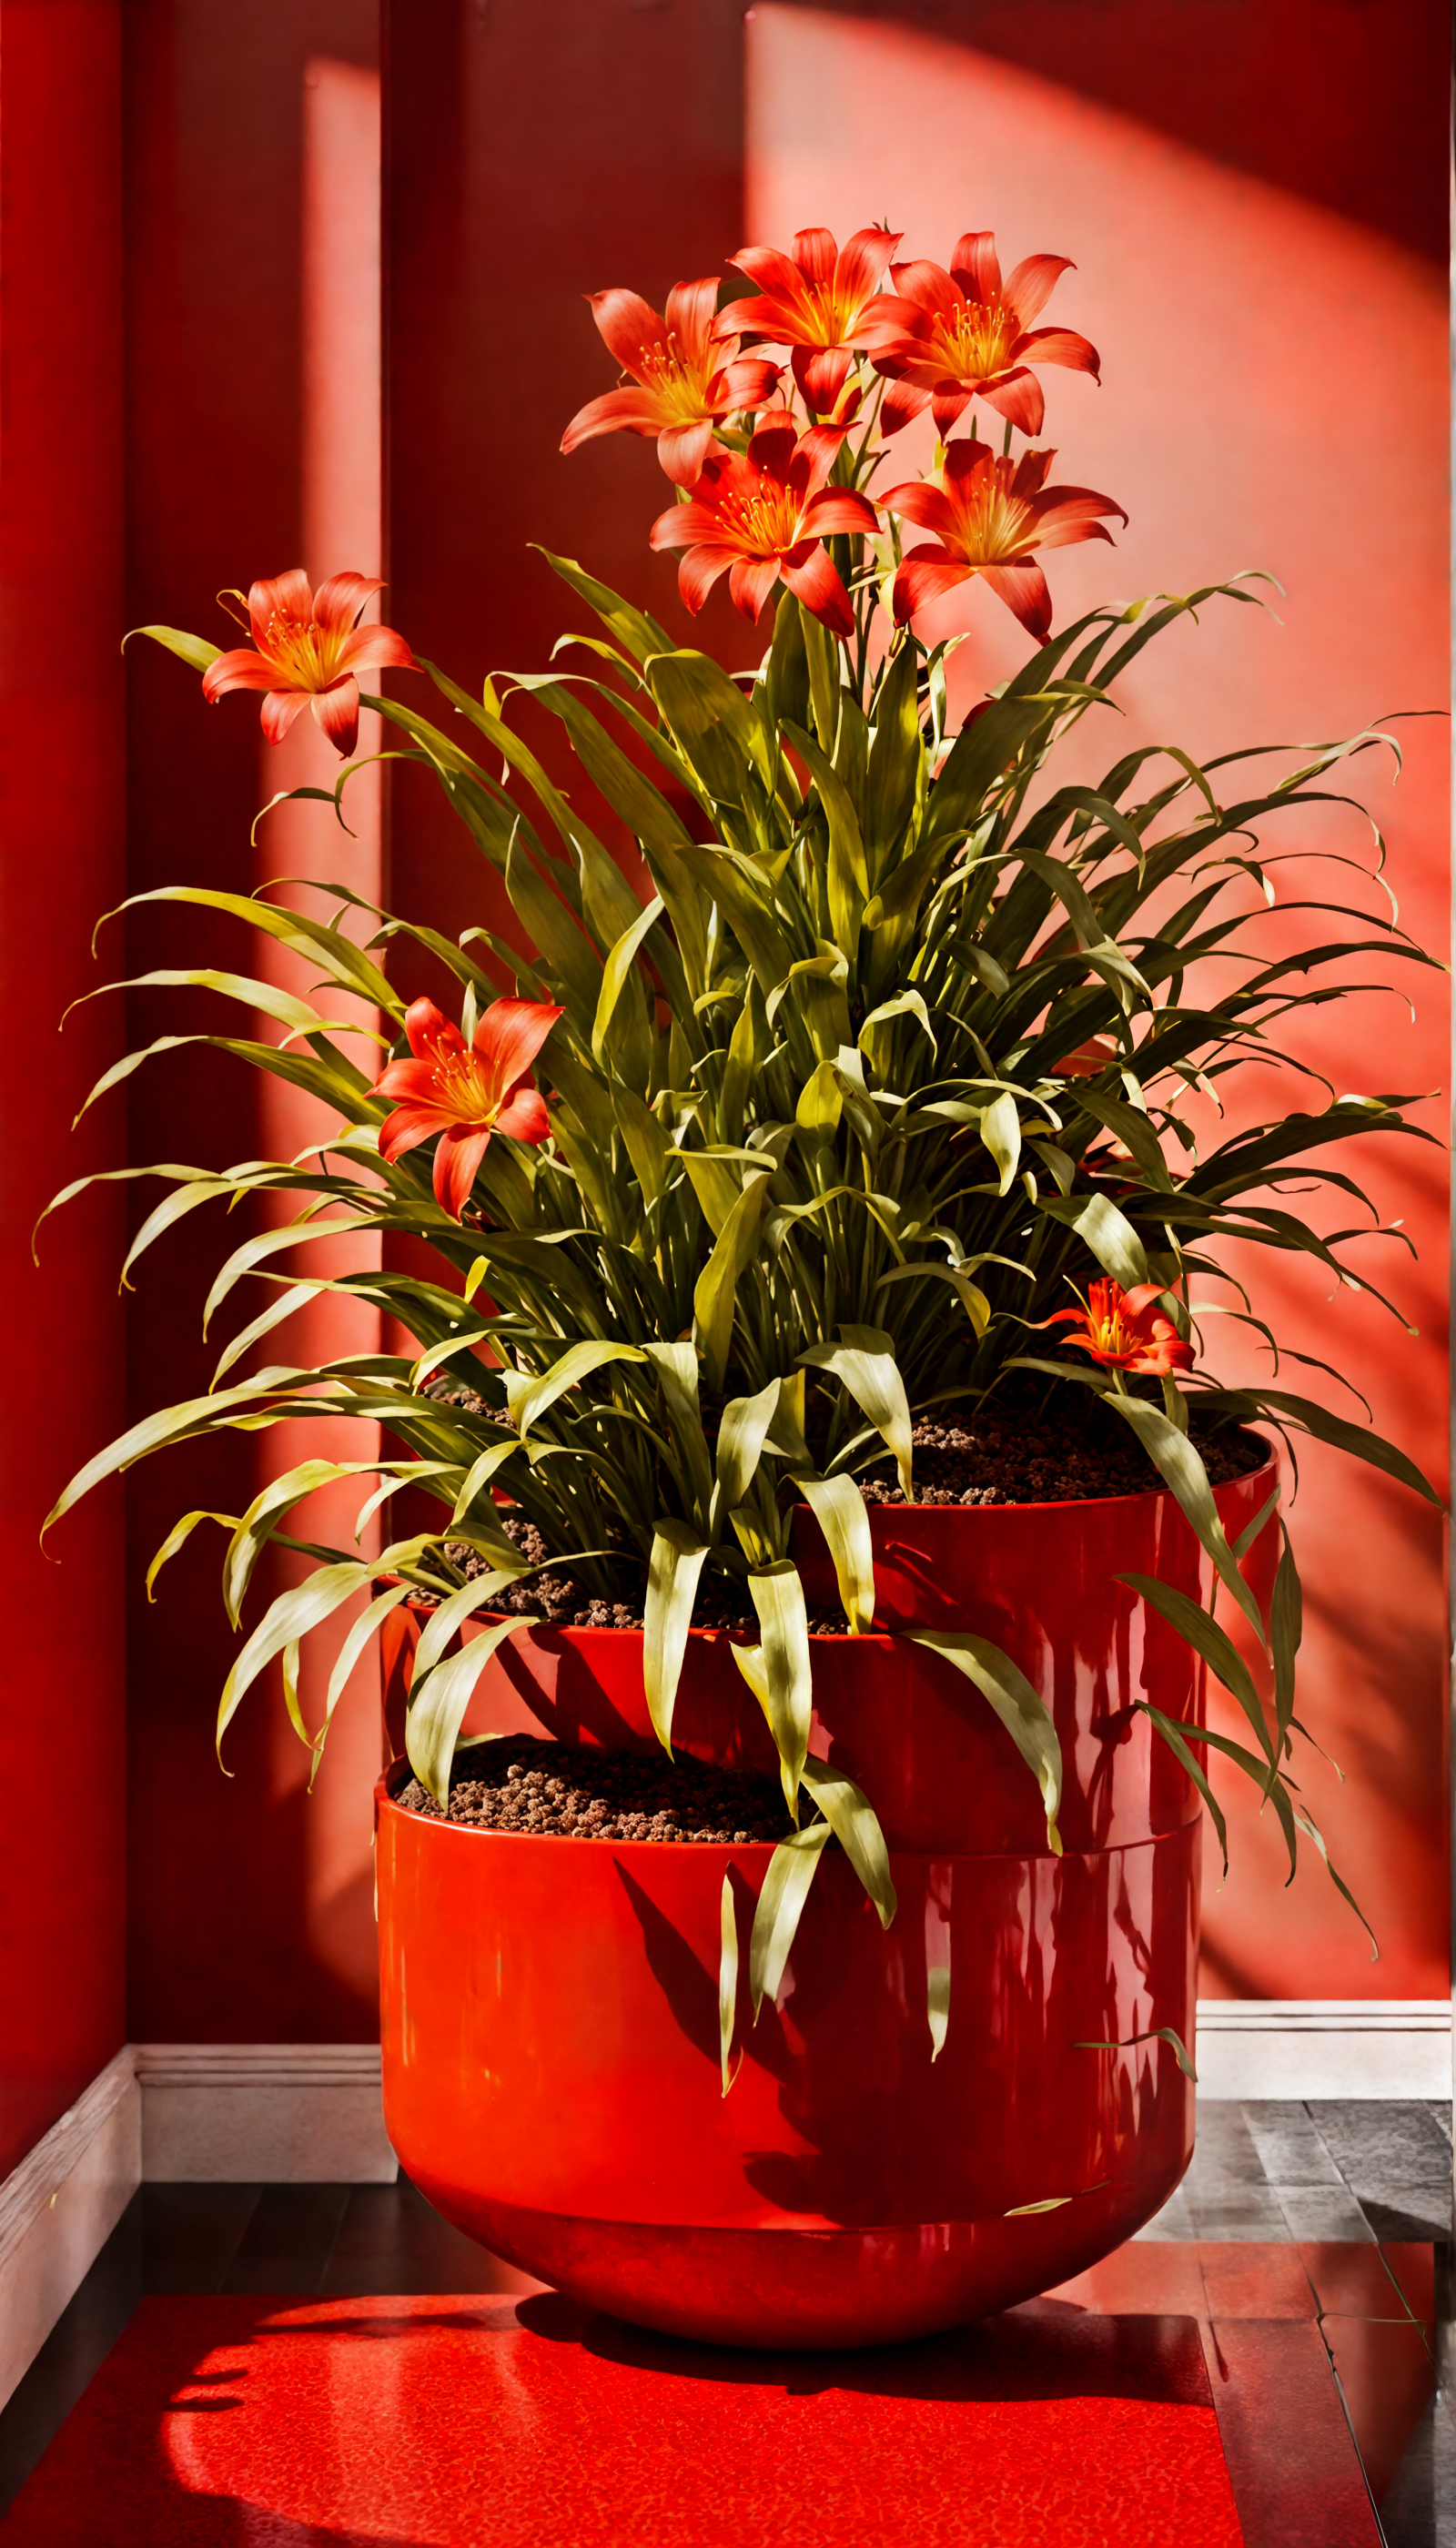 Hemerocallis fulva, vibrant red flowers in a brown bowl, on licorice floor with industrial decor.